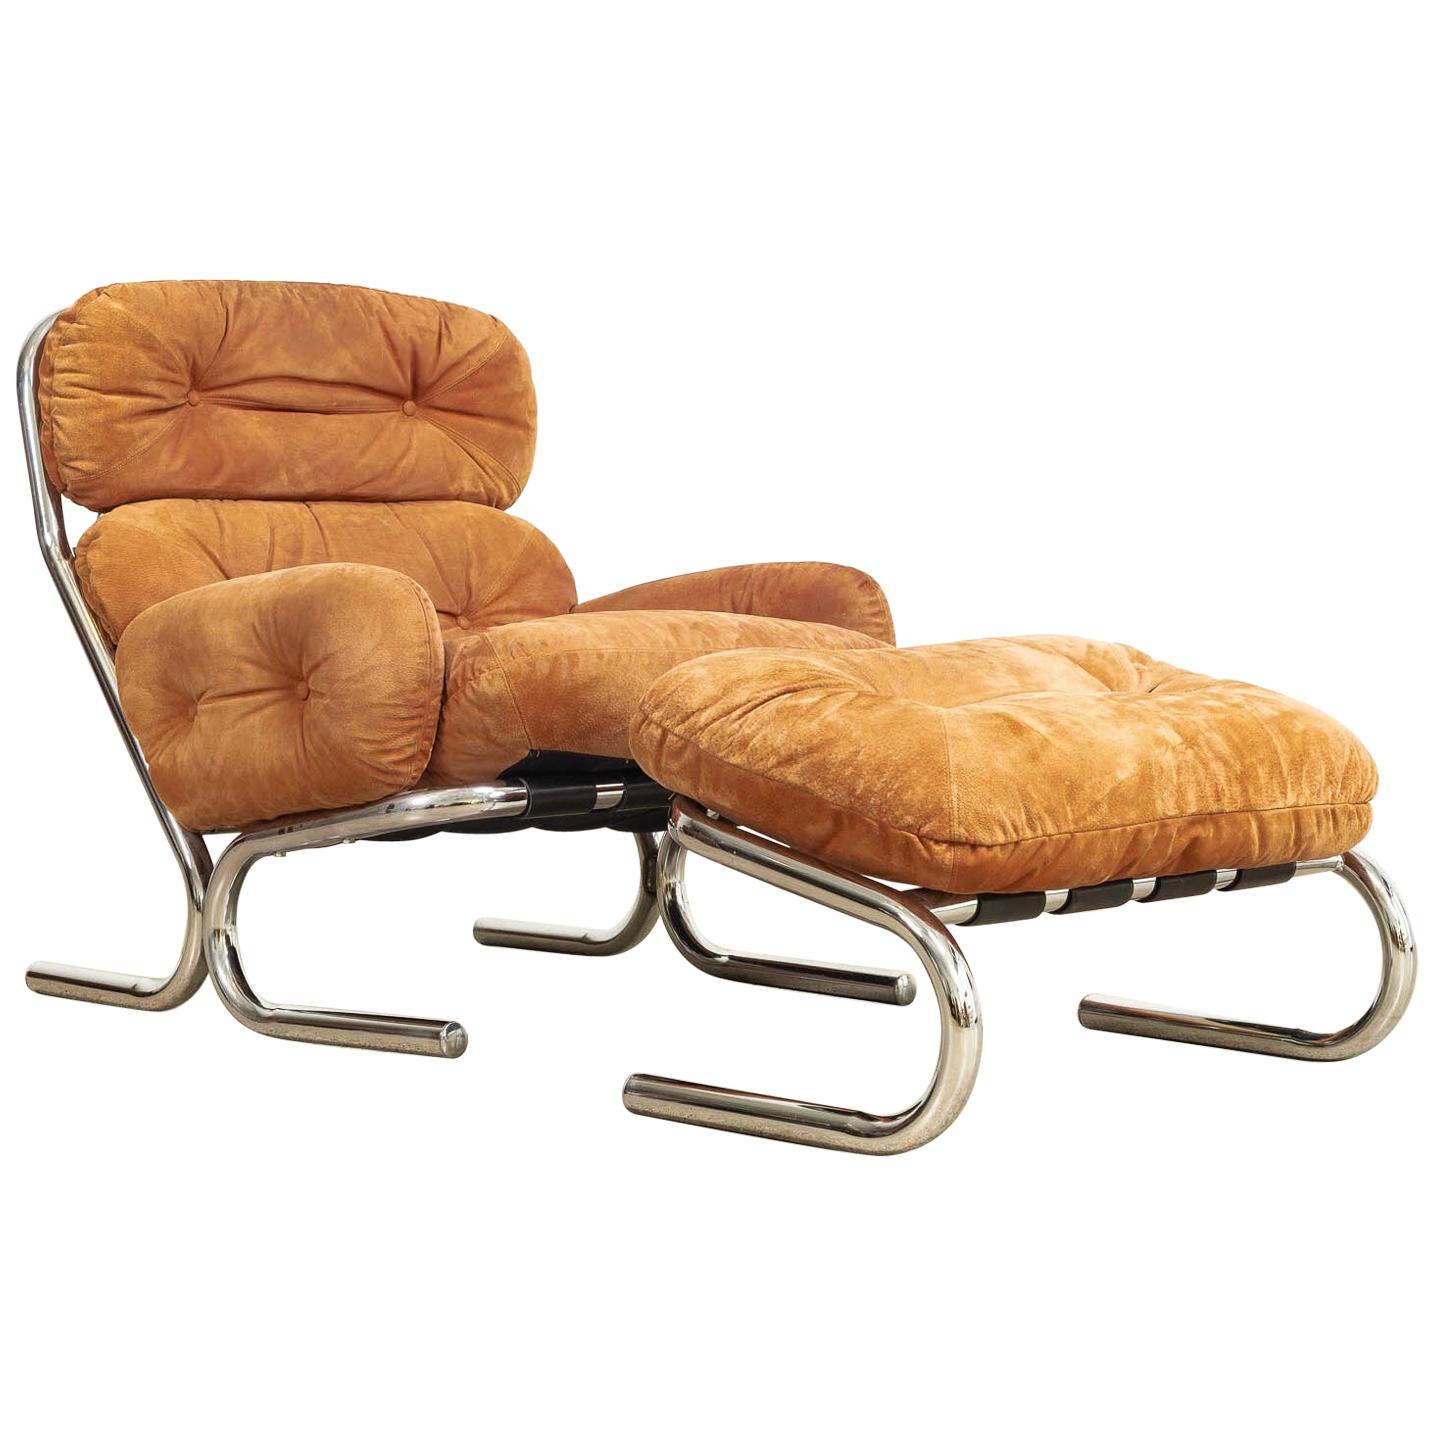 Midcentury 1970s Milo Baughman for Directional Suede & Chrome Lounge Chair For Sale